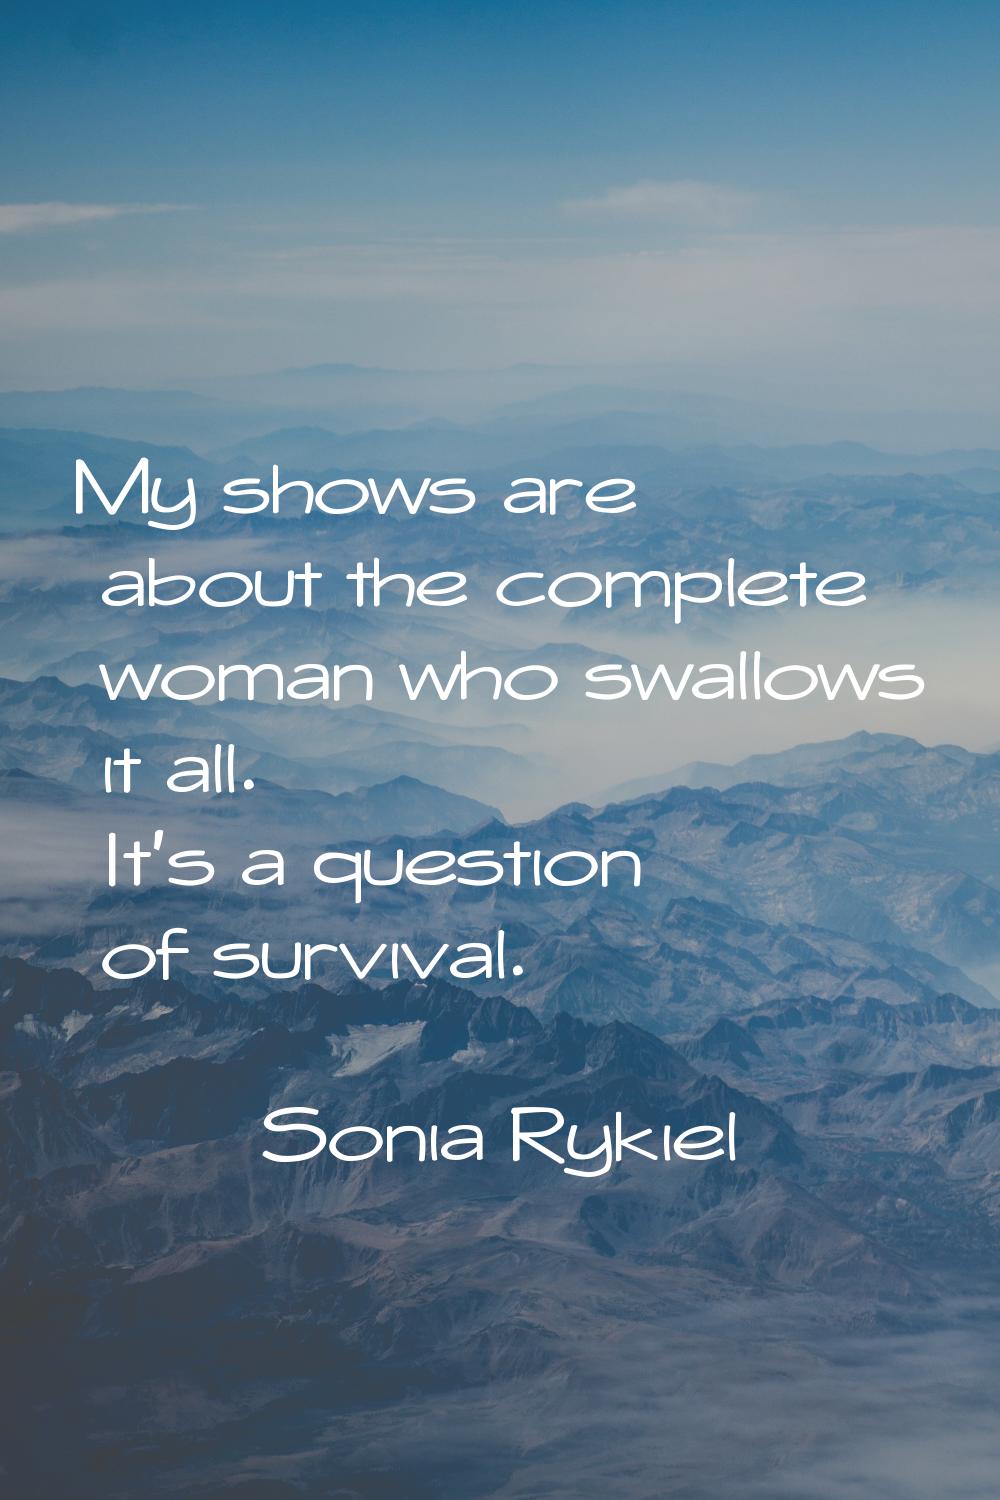 My shows are about the complete woman who swallows it all. It's a question of survival.